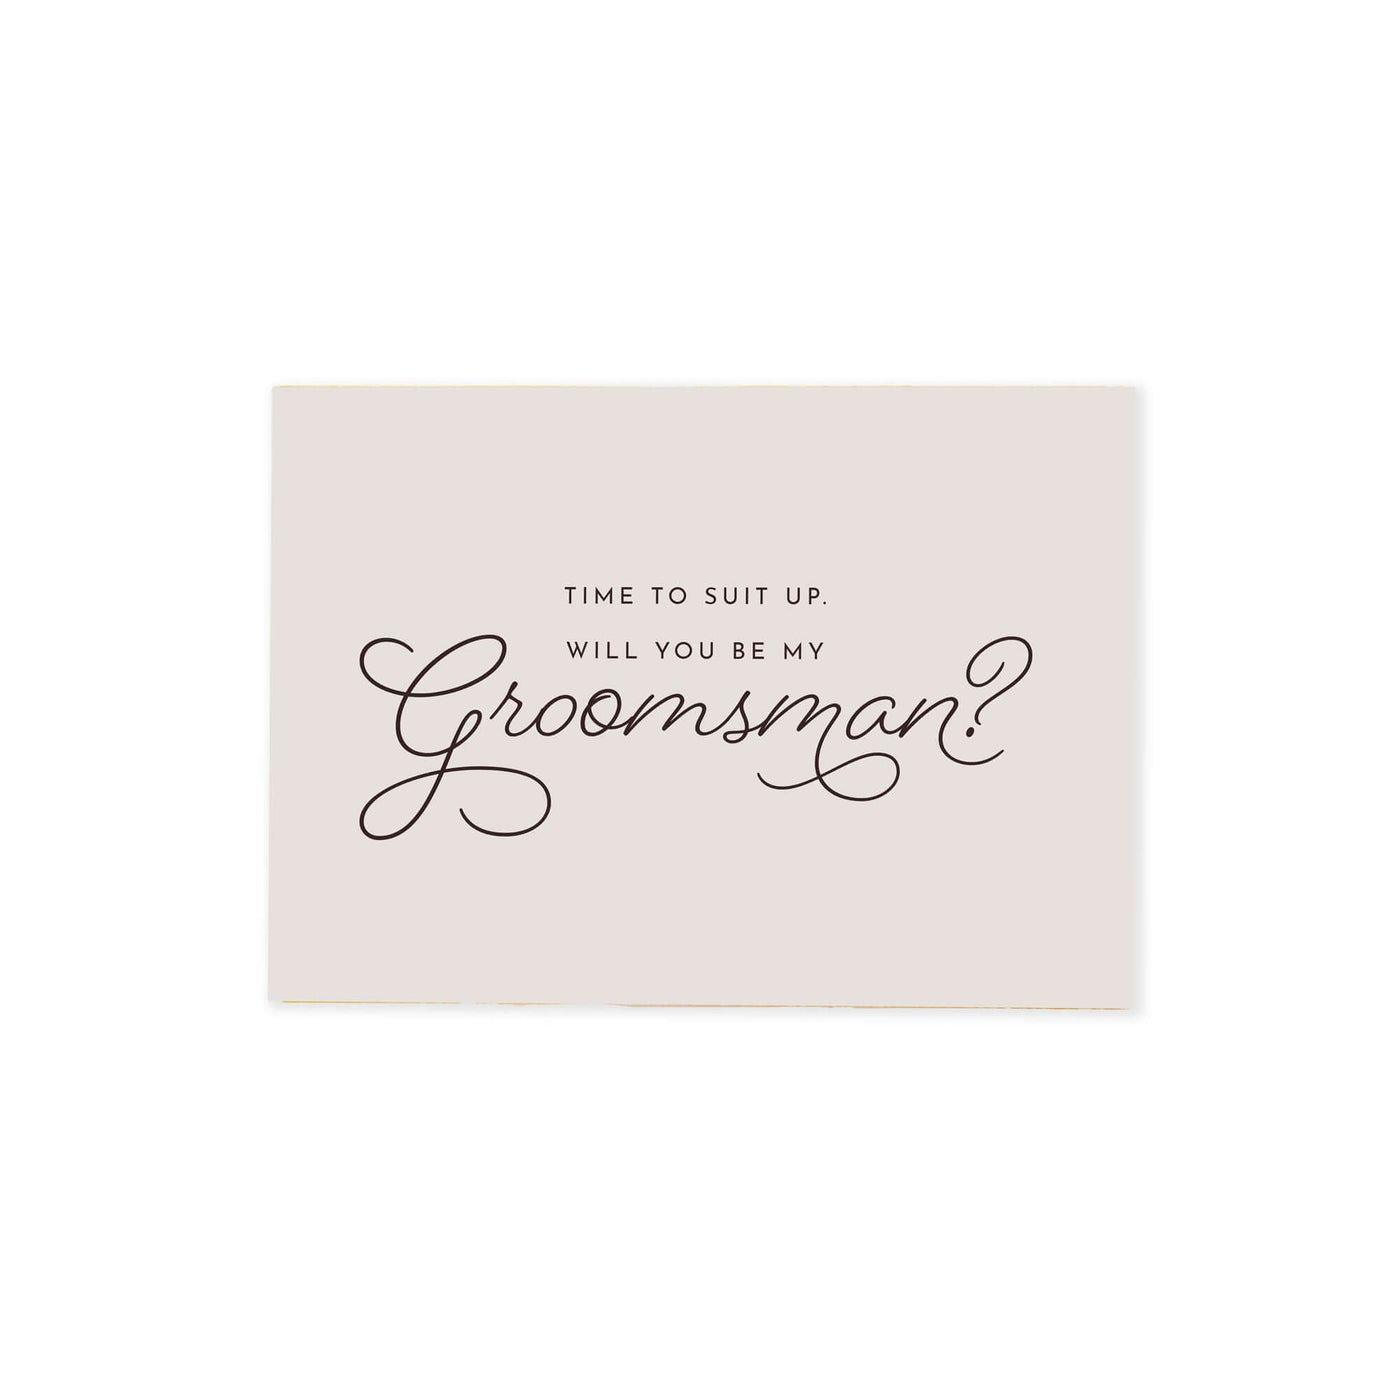 cream colored Be my groomsman proposal card that reads "time to suit up. Will you be my groomsmen?" in cursive black font.